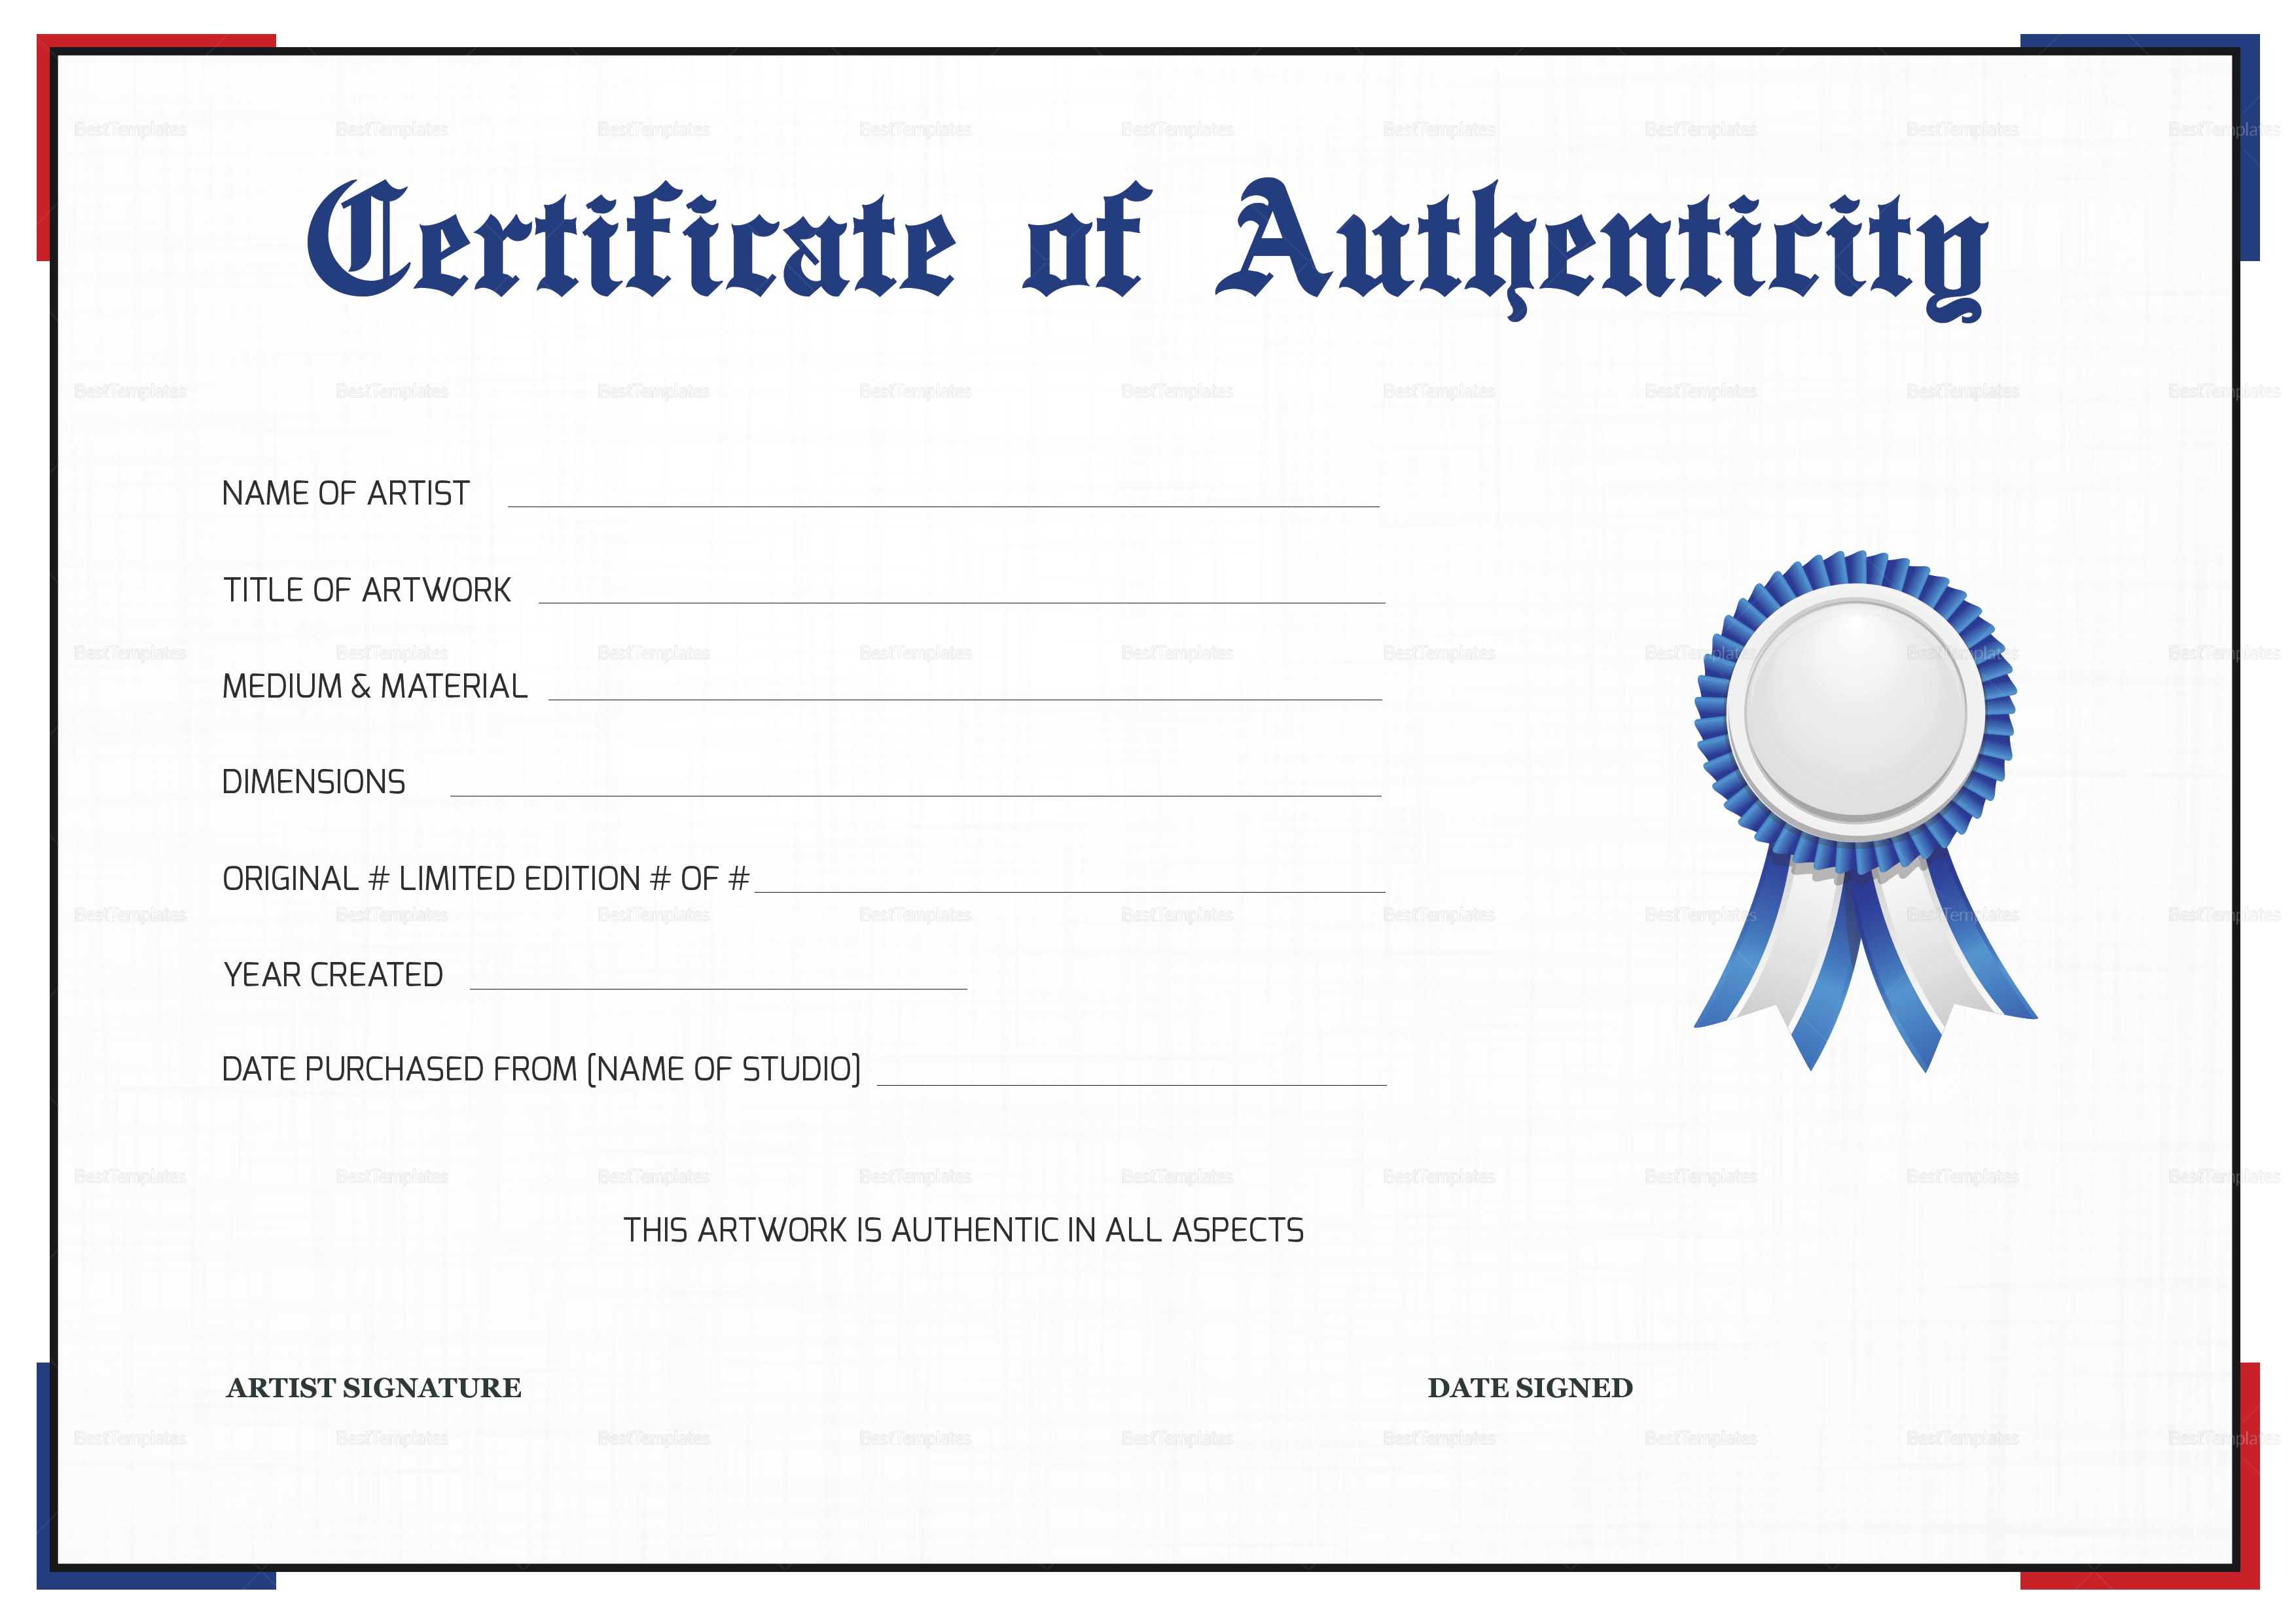 Certificate Of Authenticity Template  Sansurabionetassociats regarding Certificate Of Authenticity Photography Template